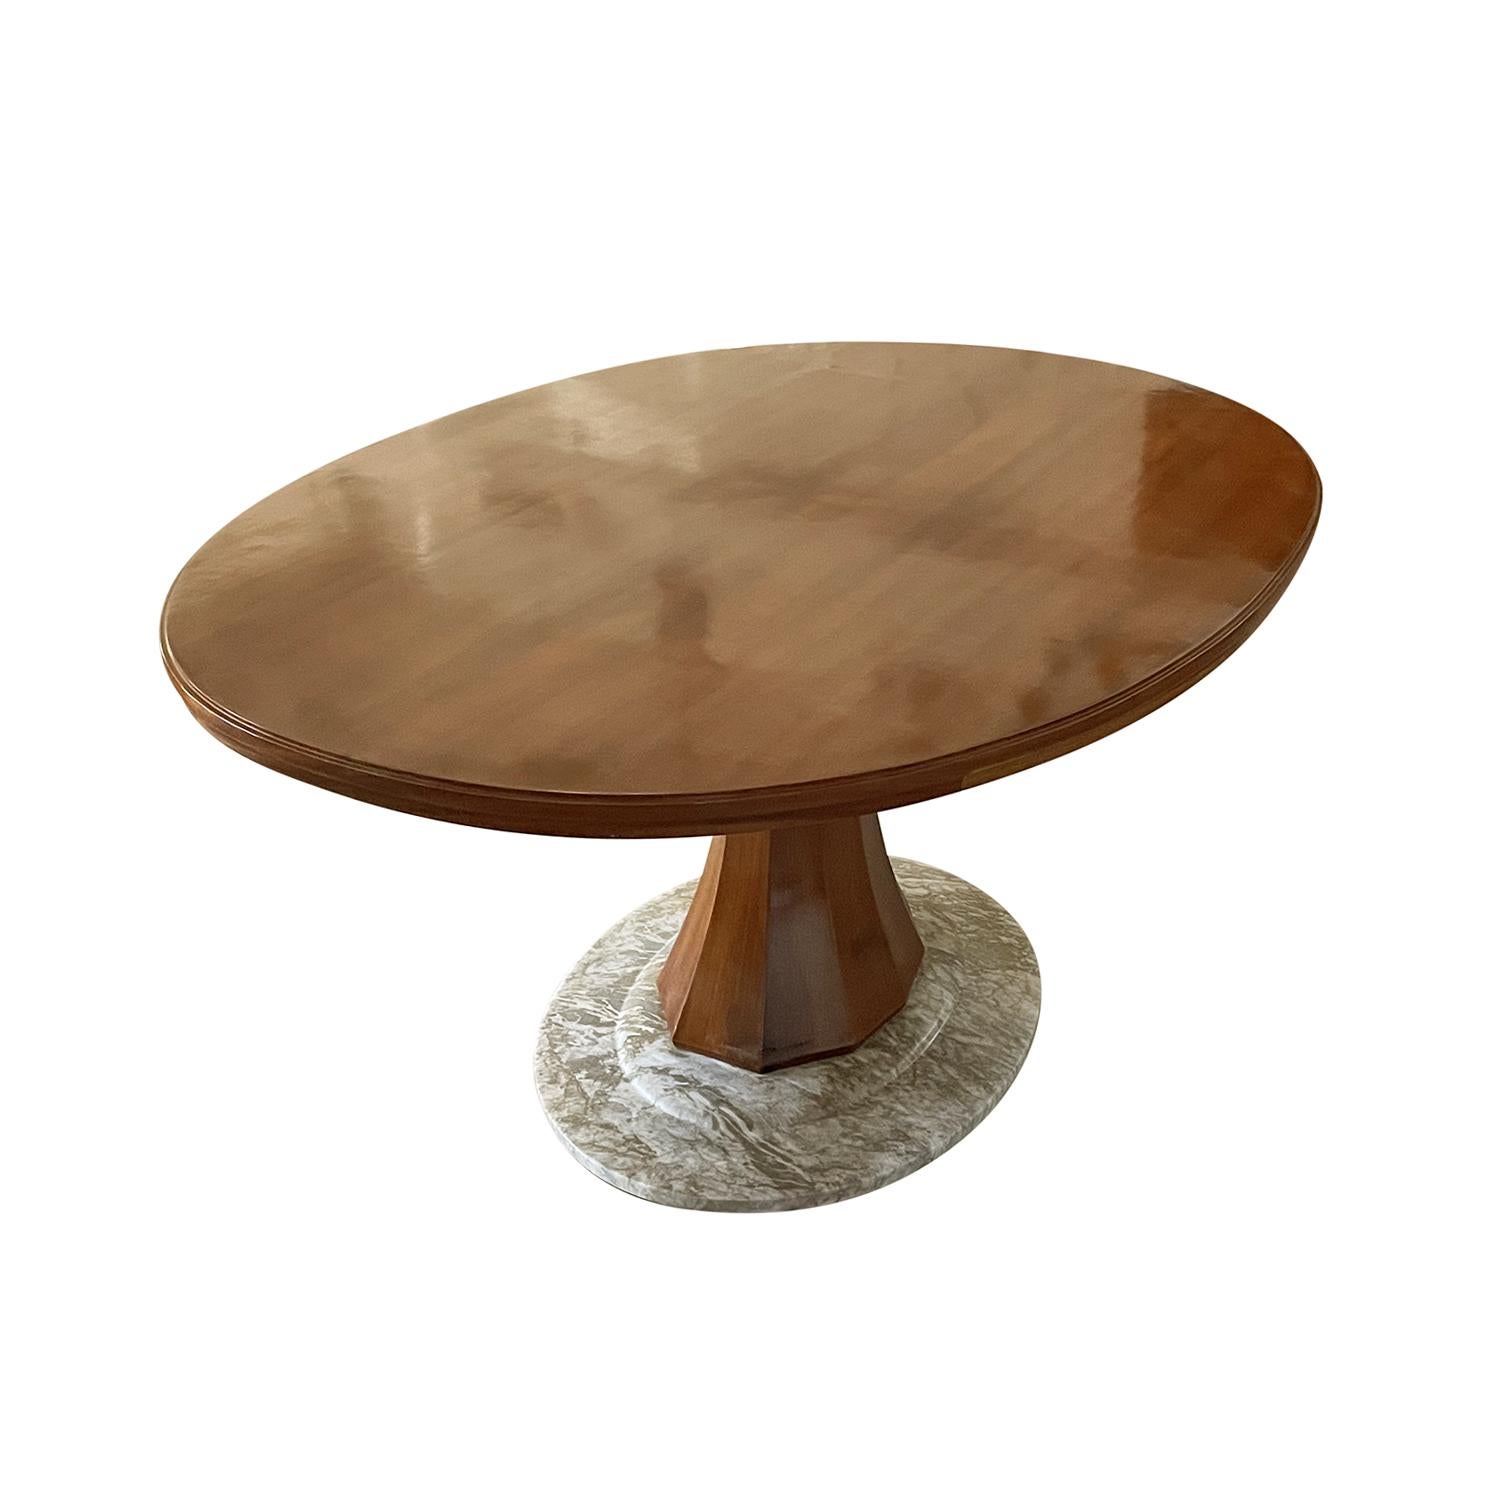 Hand-Carved 20th Century Italian Large Oval Rosewood, Marble Dining Table by Vittorio Dassi